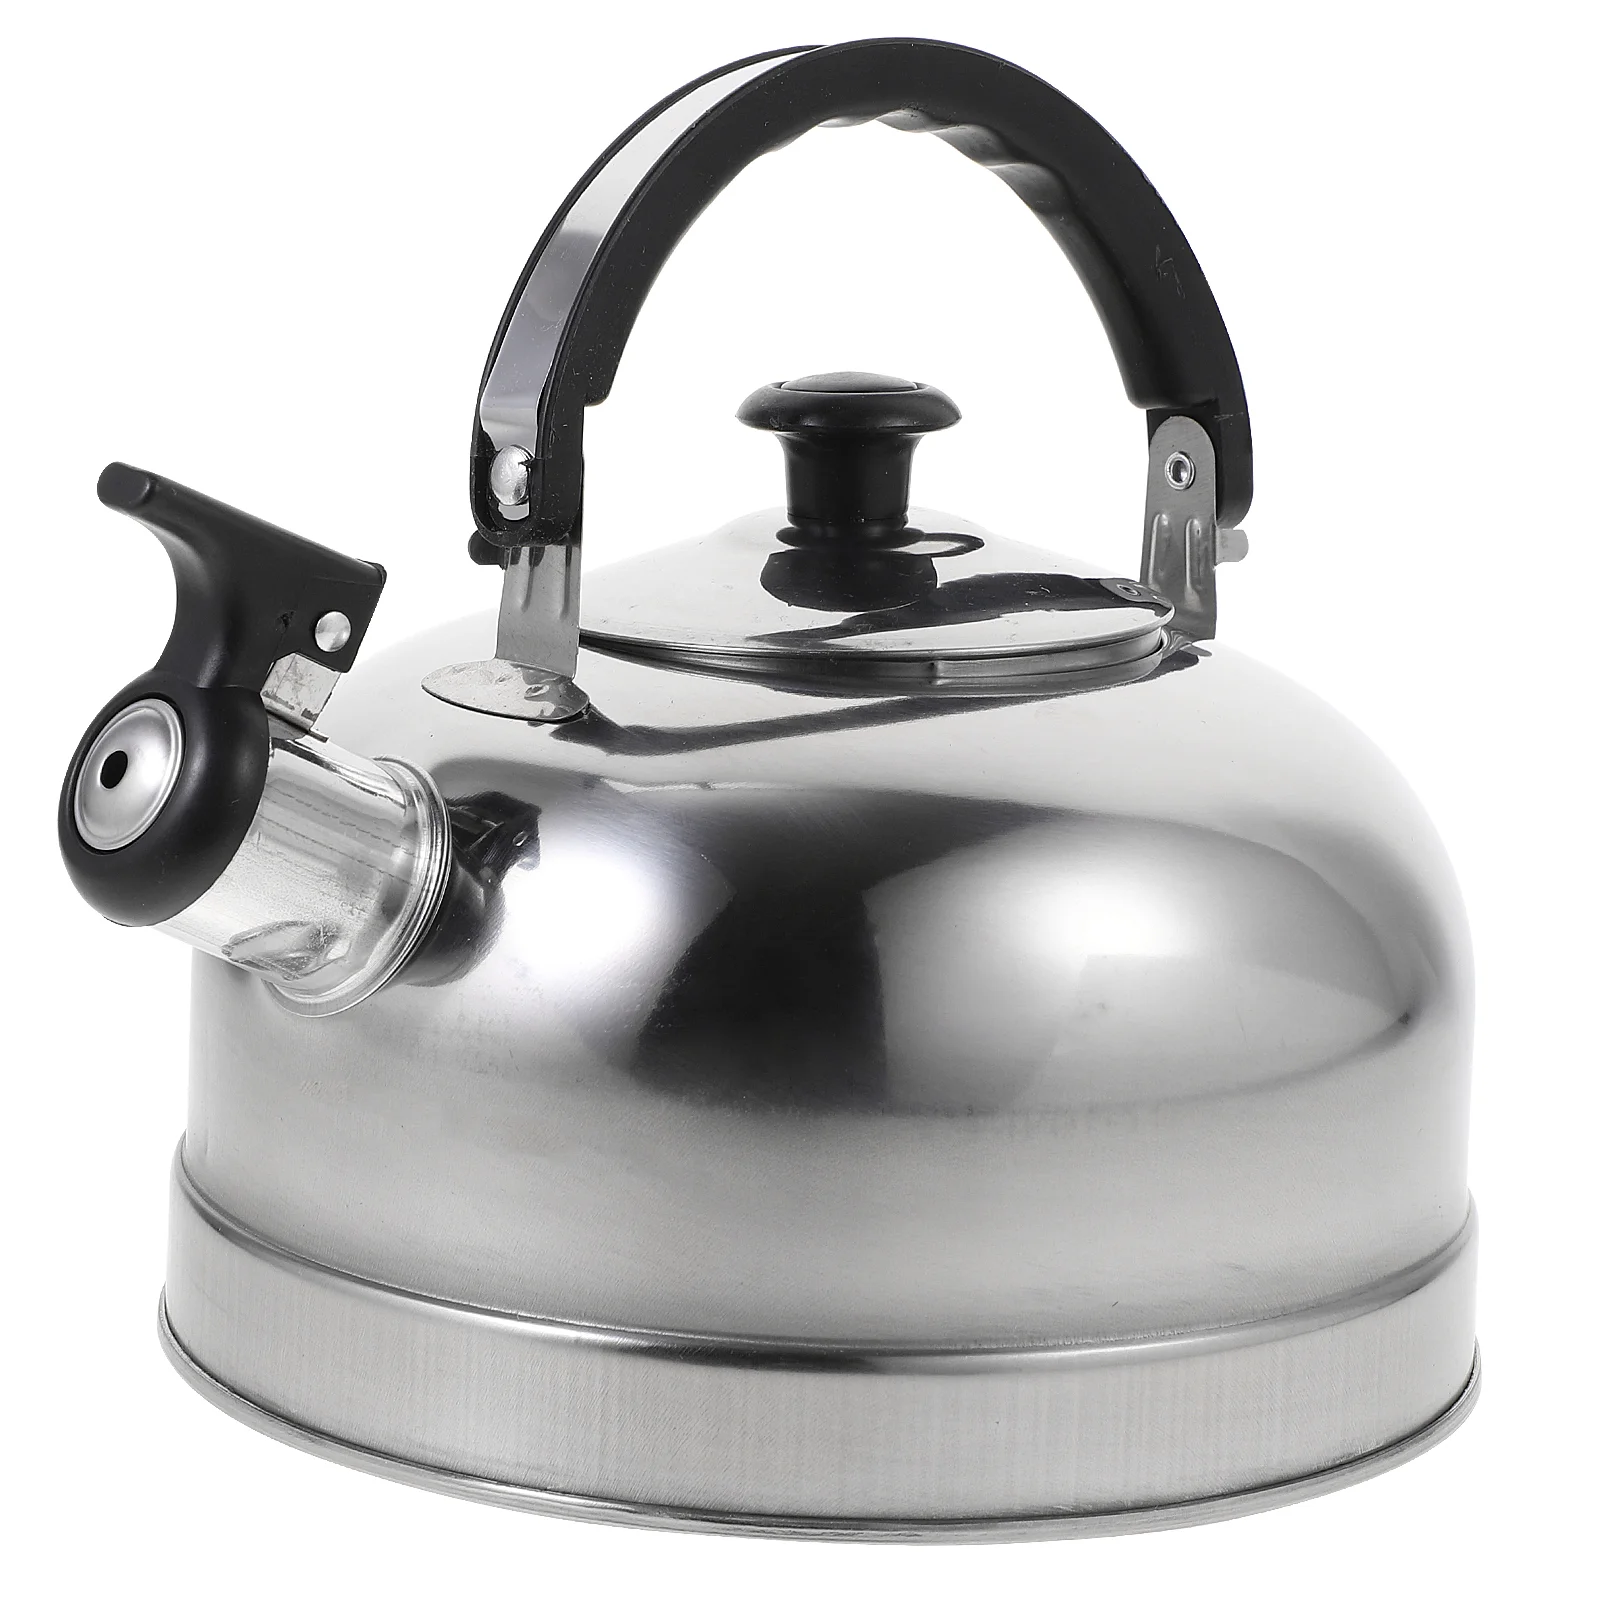 

Stovetop Safe Kettle Whistling Coffee Pot Gas Indoor Heater Water Heating Tea Stainless Steel Boiling Teakettle